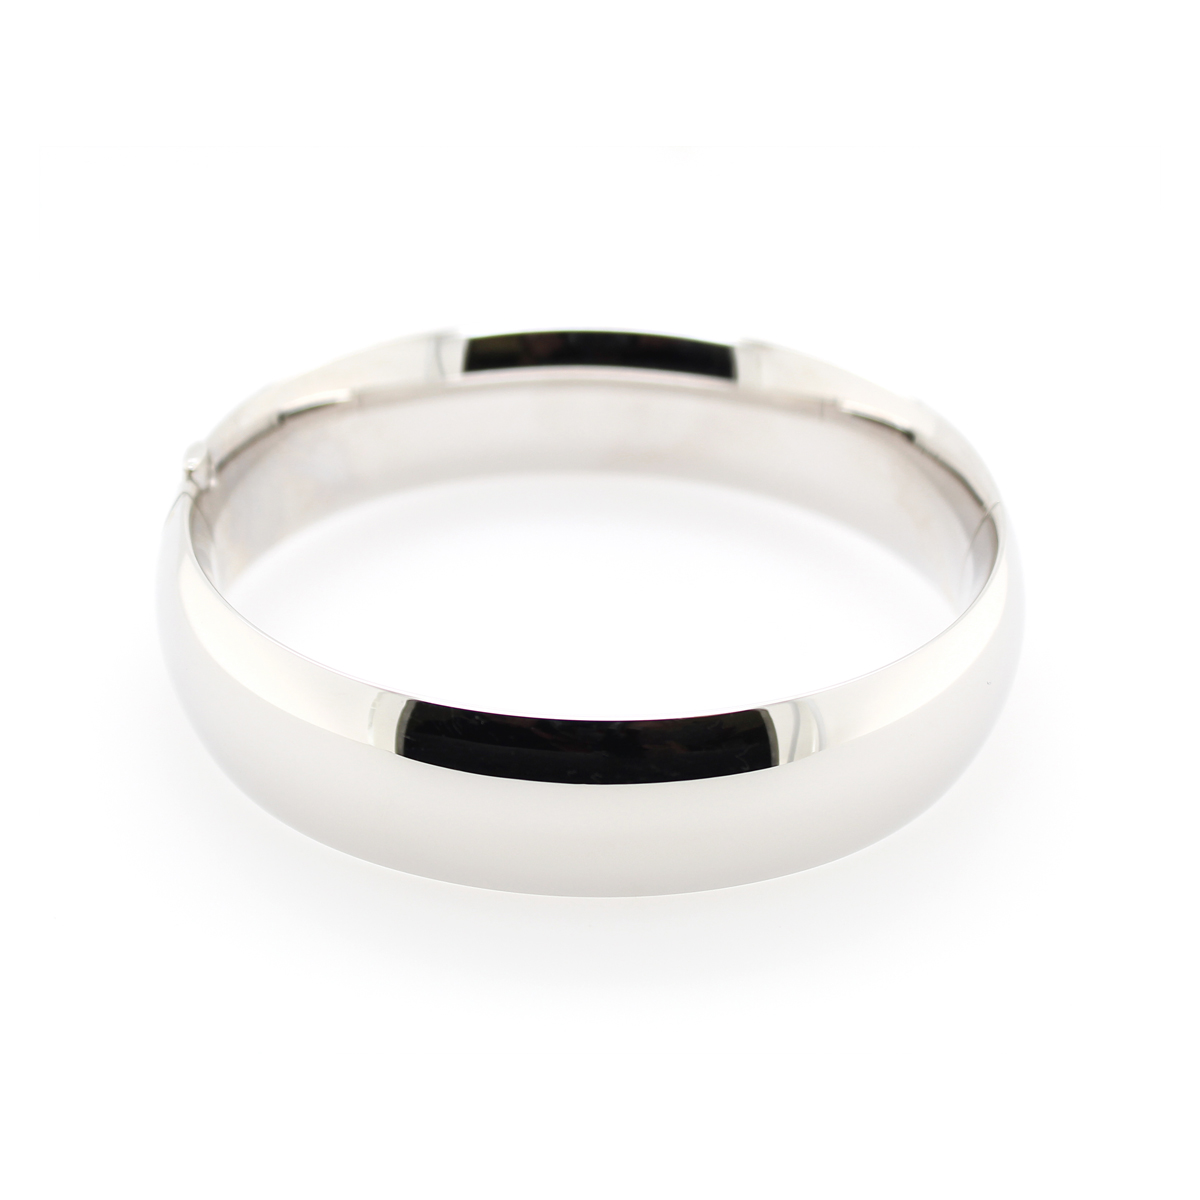 Sterling Silver Adult 14mm Hinged Bangle Having A High Polished Finish